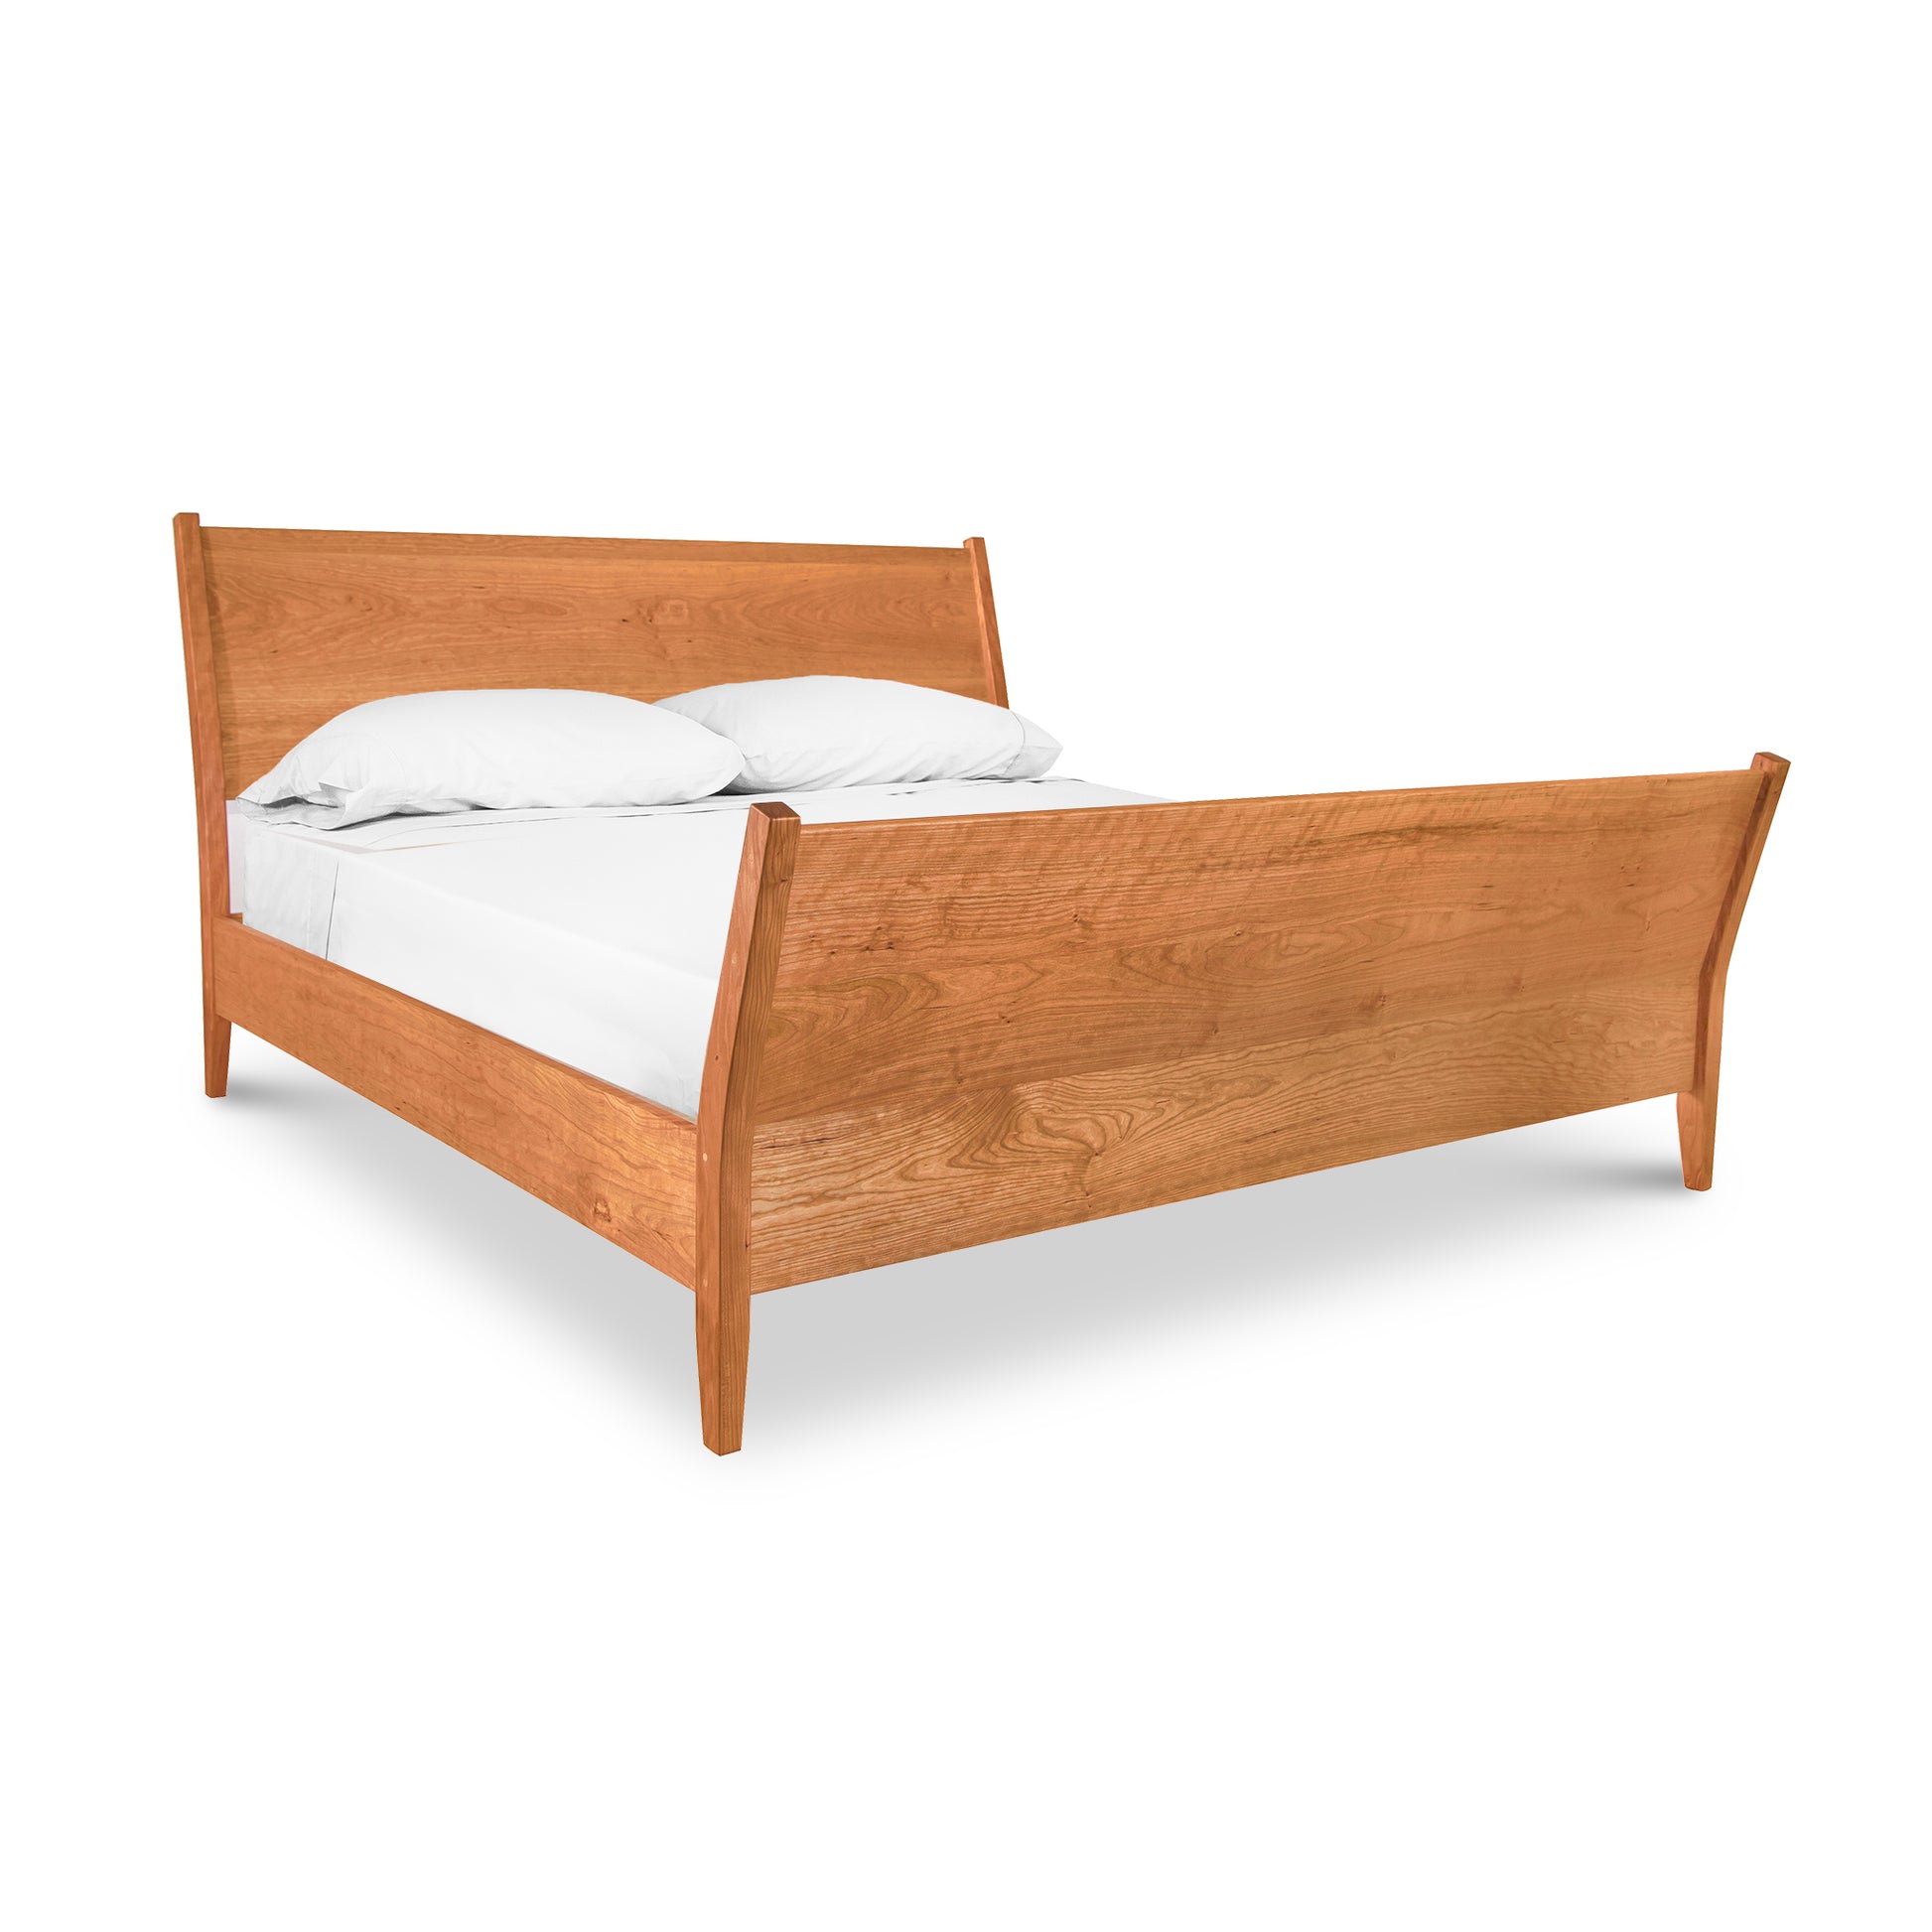 A Maple Corner Woodworks Andover Modern Incline Sleigh Bed with a white mattress and two pillows set against a white background.